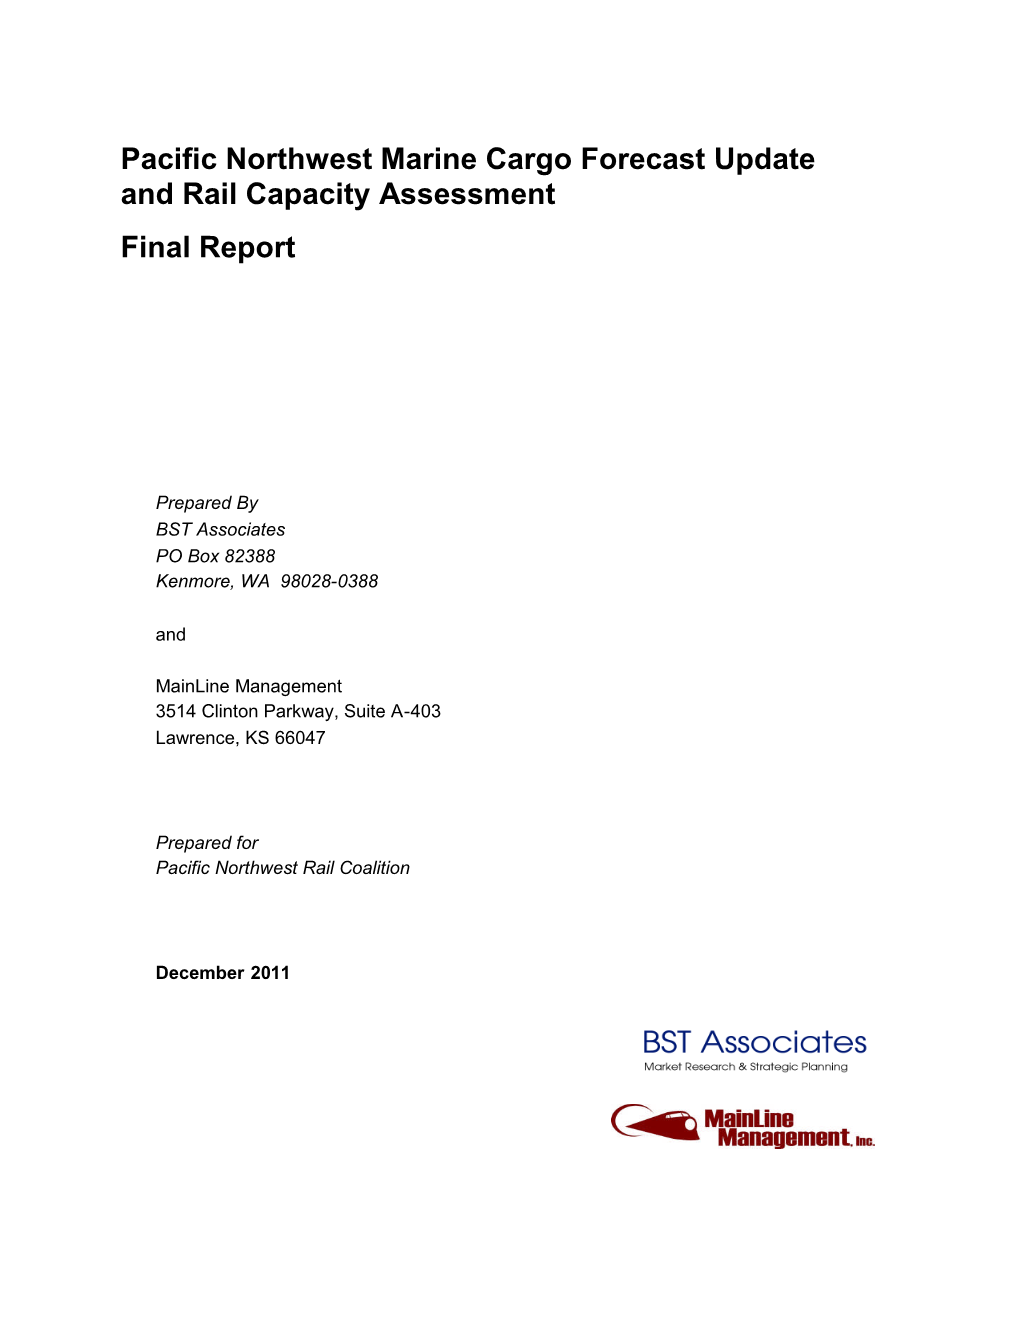 Pacific Northwest Marine Cargo Forecast Update and Rail Capacity Assessment Final Report